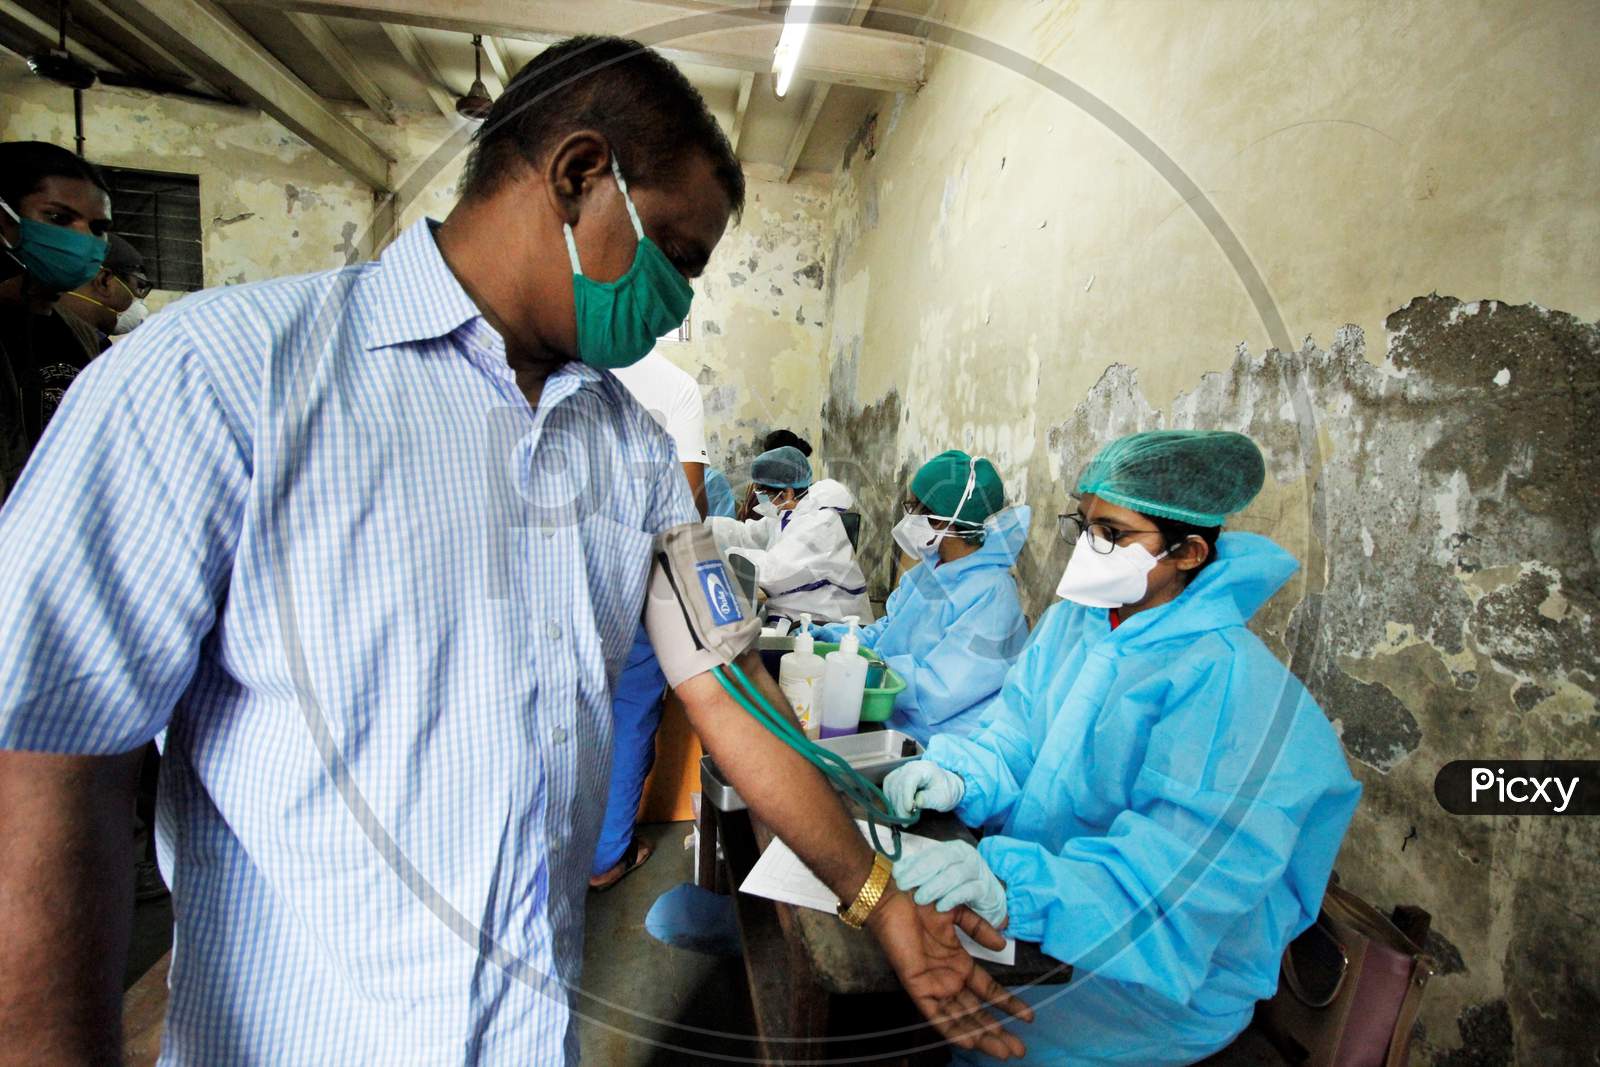 A healthcare worker checks BP of a recovered Covid-19 patient during screening for plasma donation, at a camp set inside a classroom of a school, at Dharavi, in Mumbai, India on July 23, 2020.